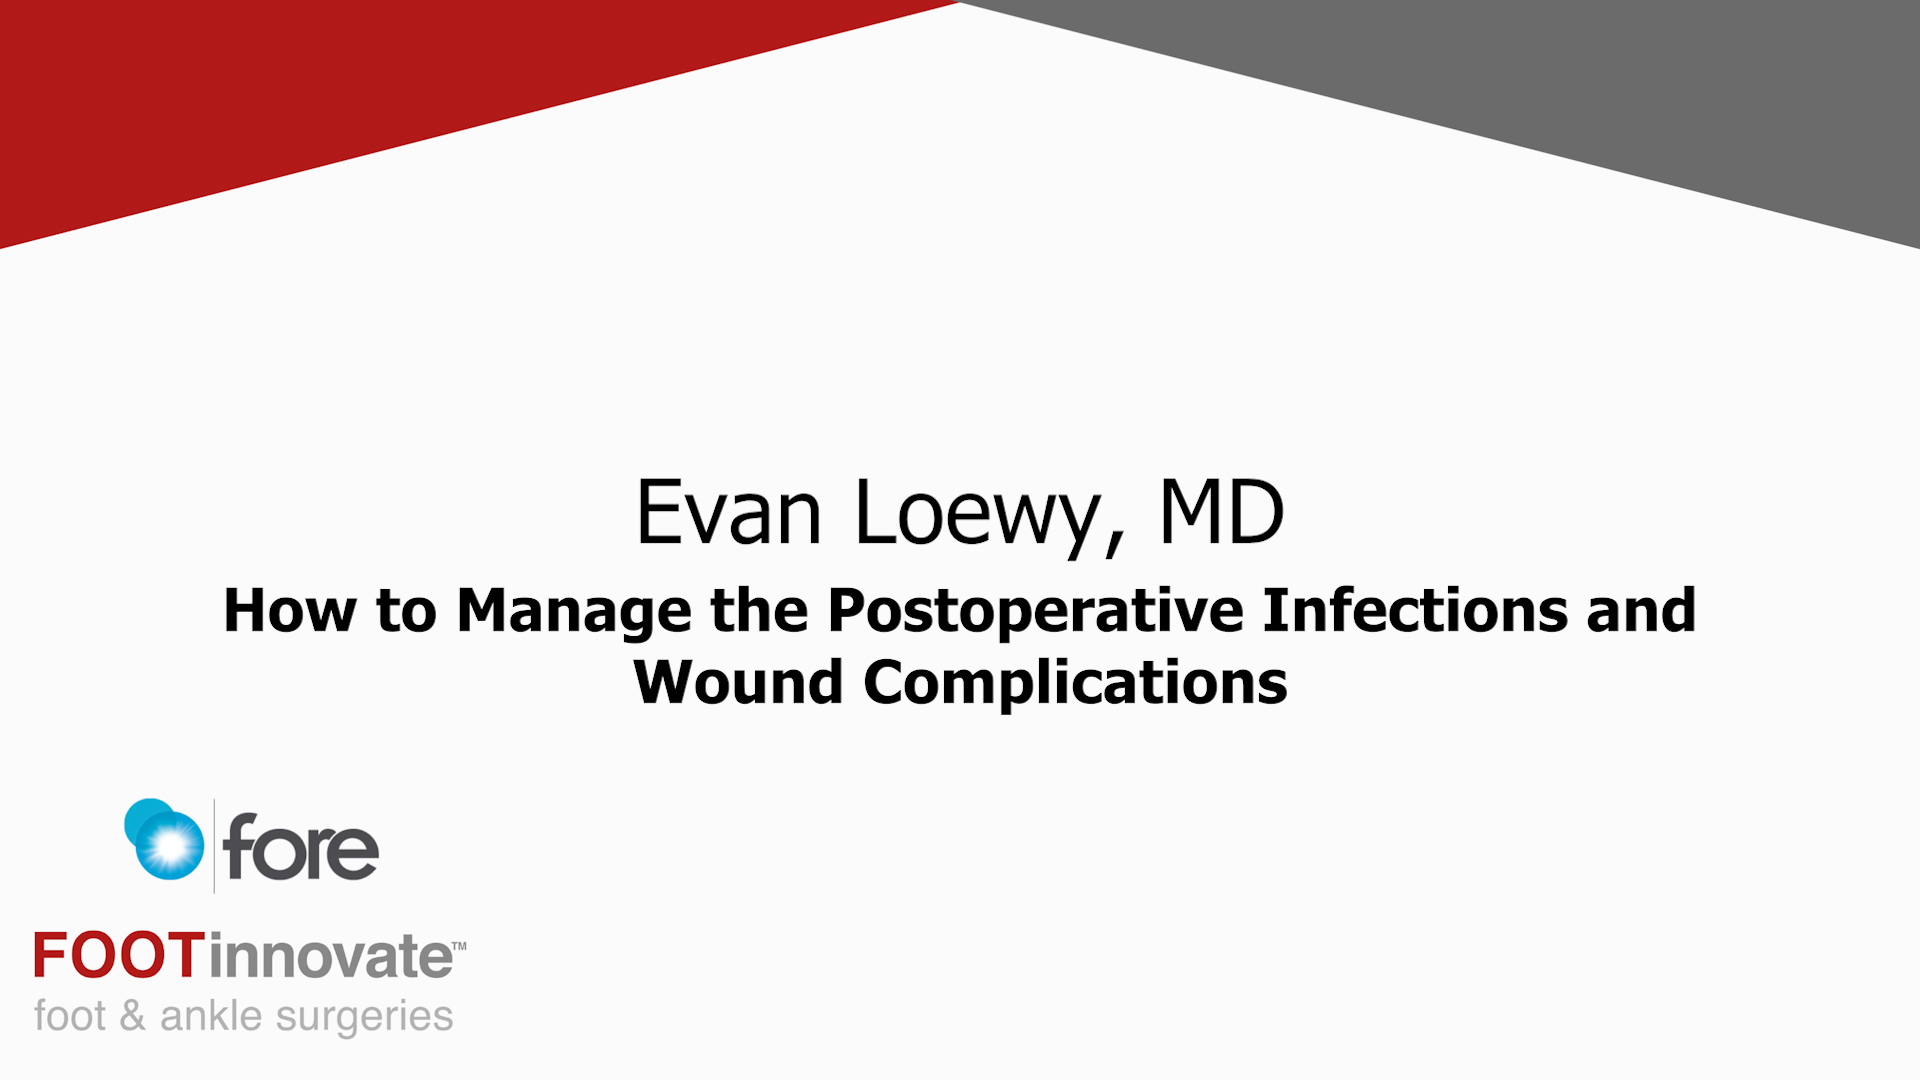 FORE TAR Summit: How to Manage the Postoperative Infections and Wound Complications